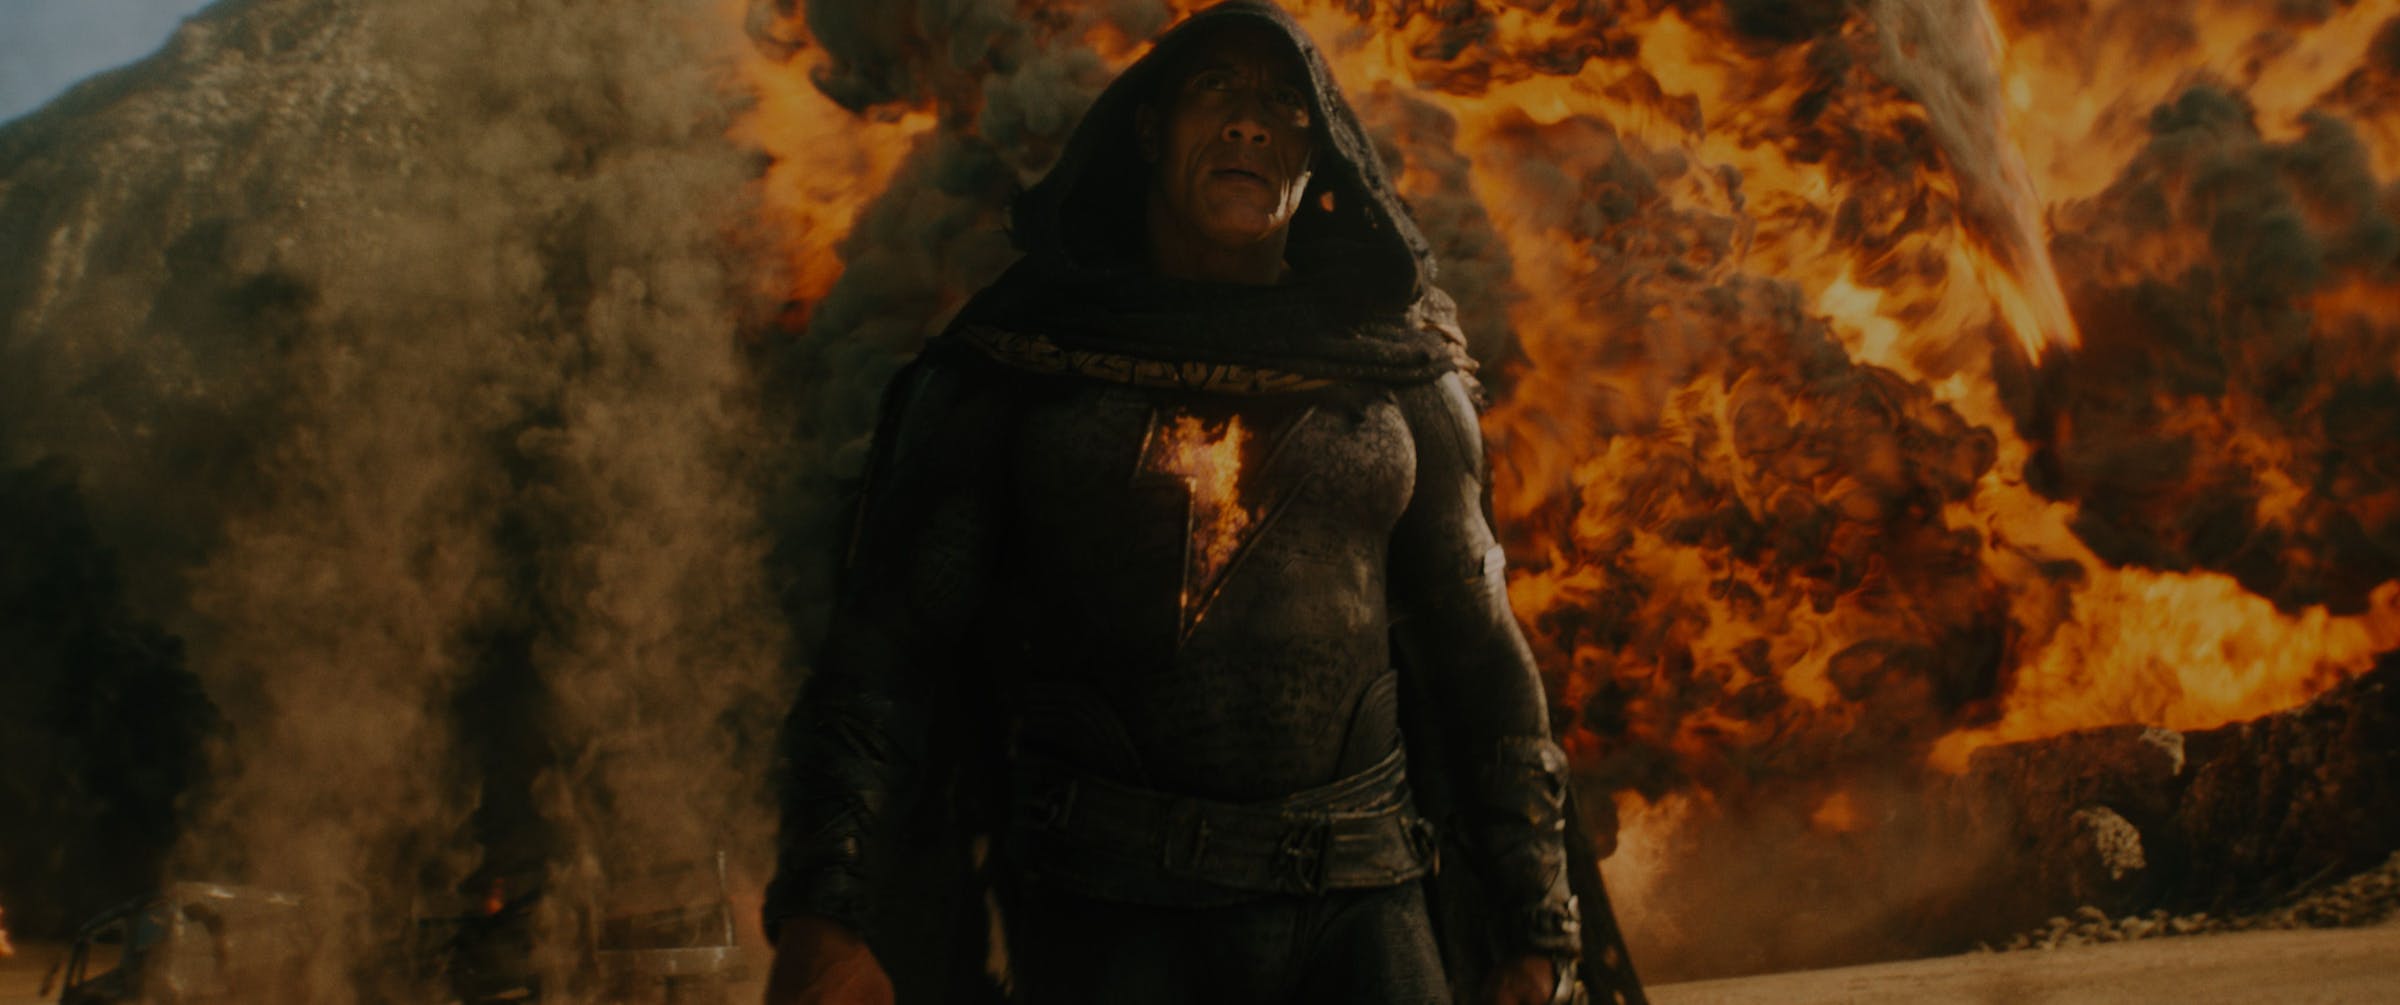 A man in a black body suit emblazoned with a glowing lightning bolt and accented by a black hooded cape. Behind the man is a wall of flames from an explosion he’s caused.